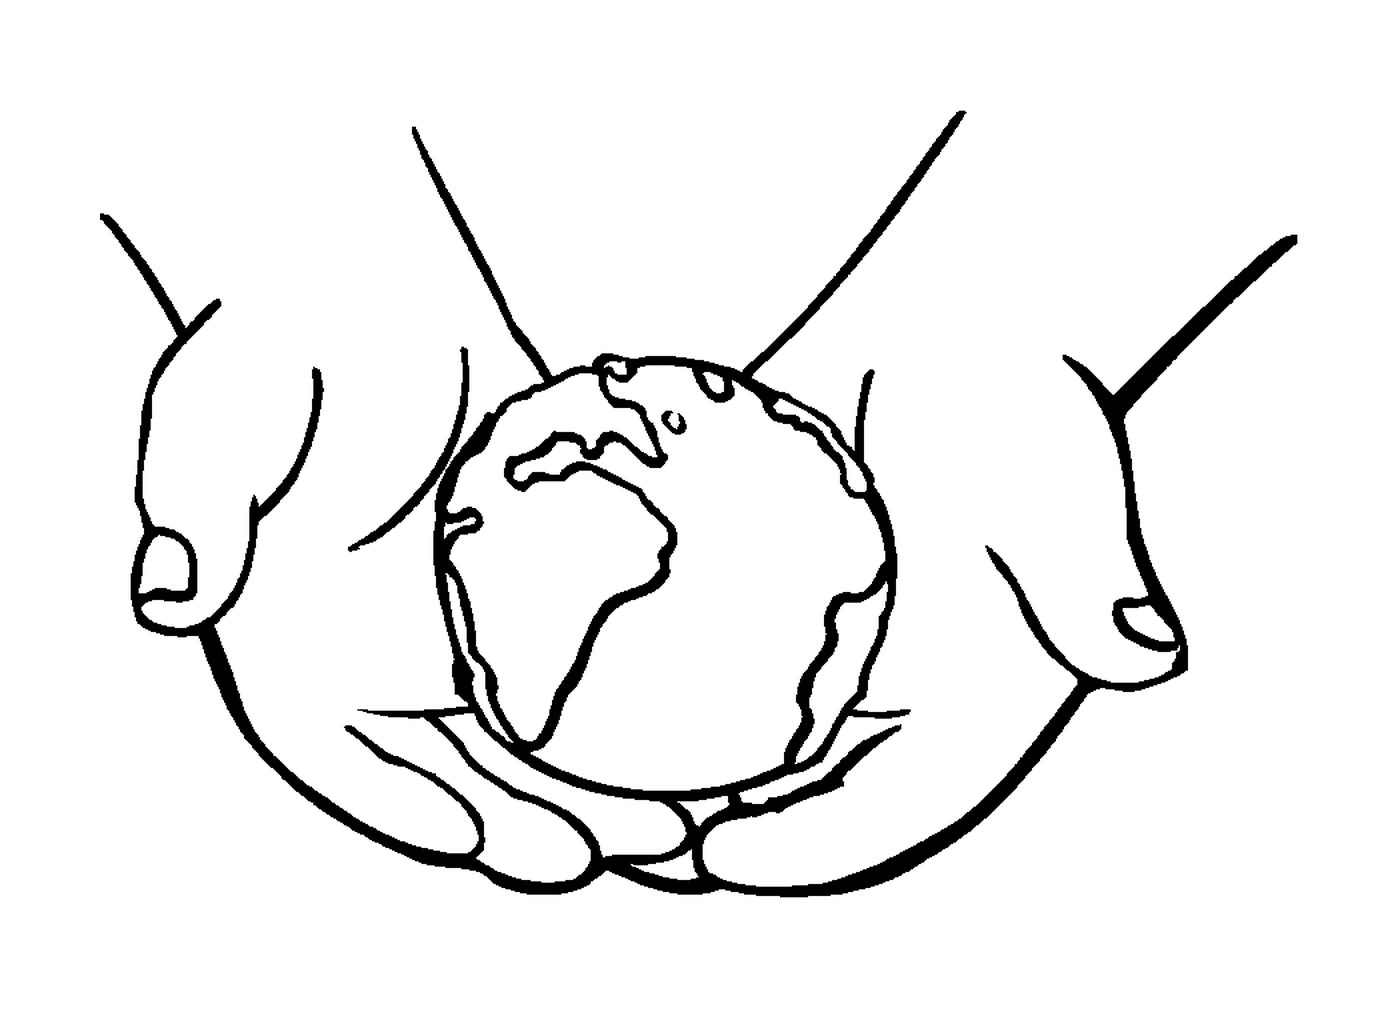  Hold the Earth in its hands, symbol of union 